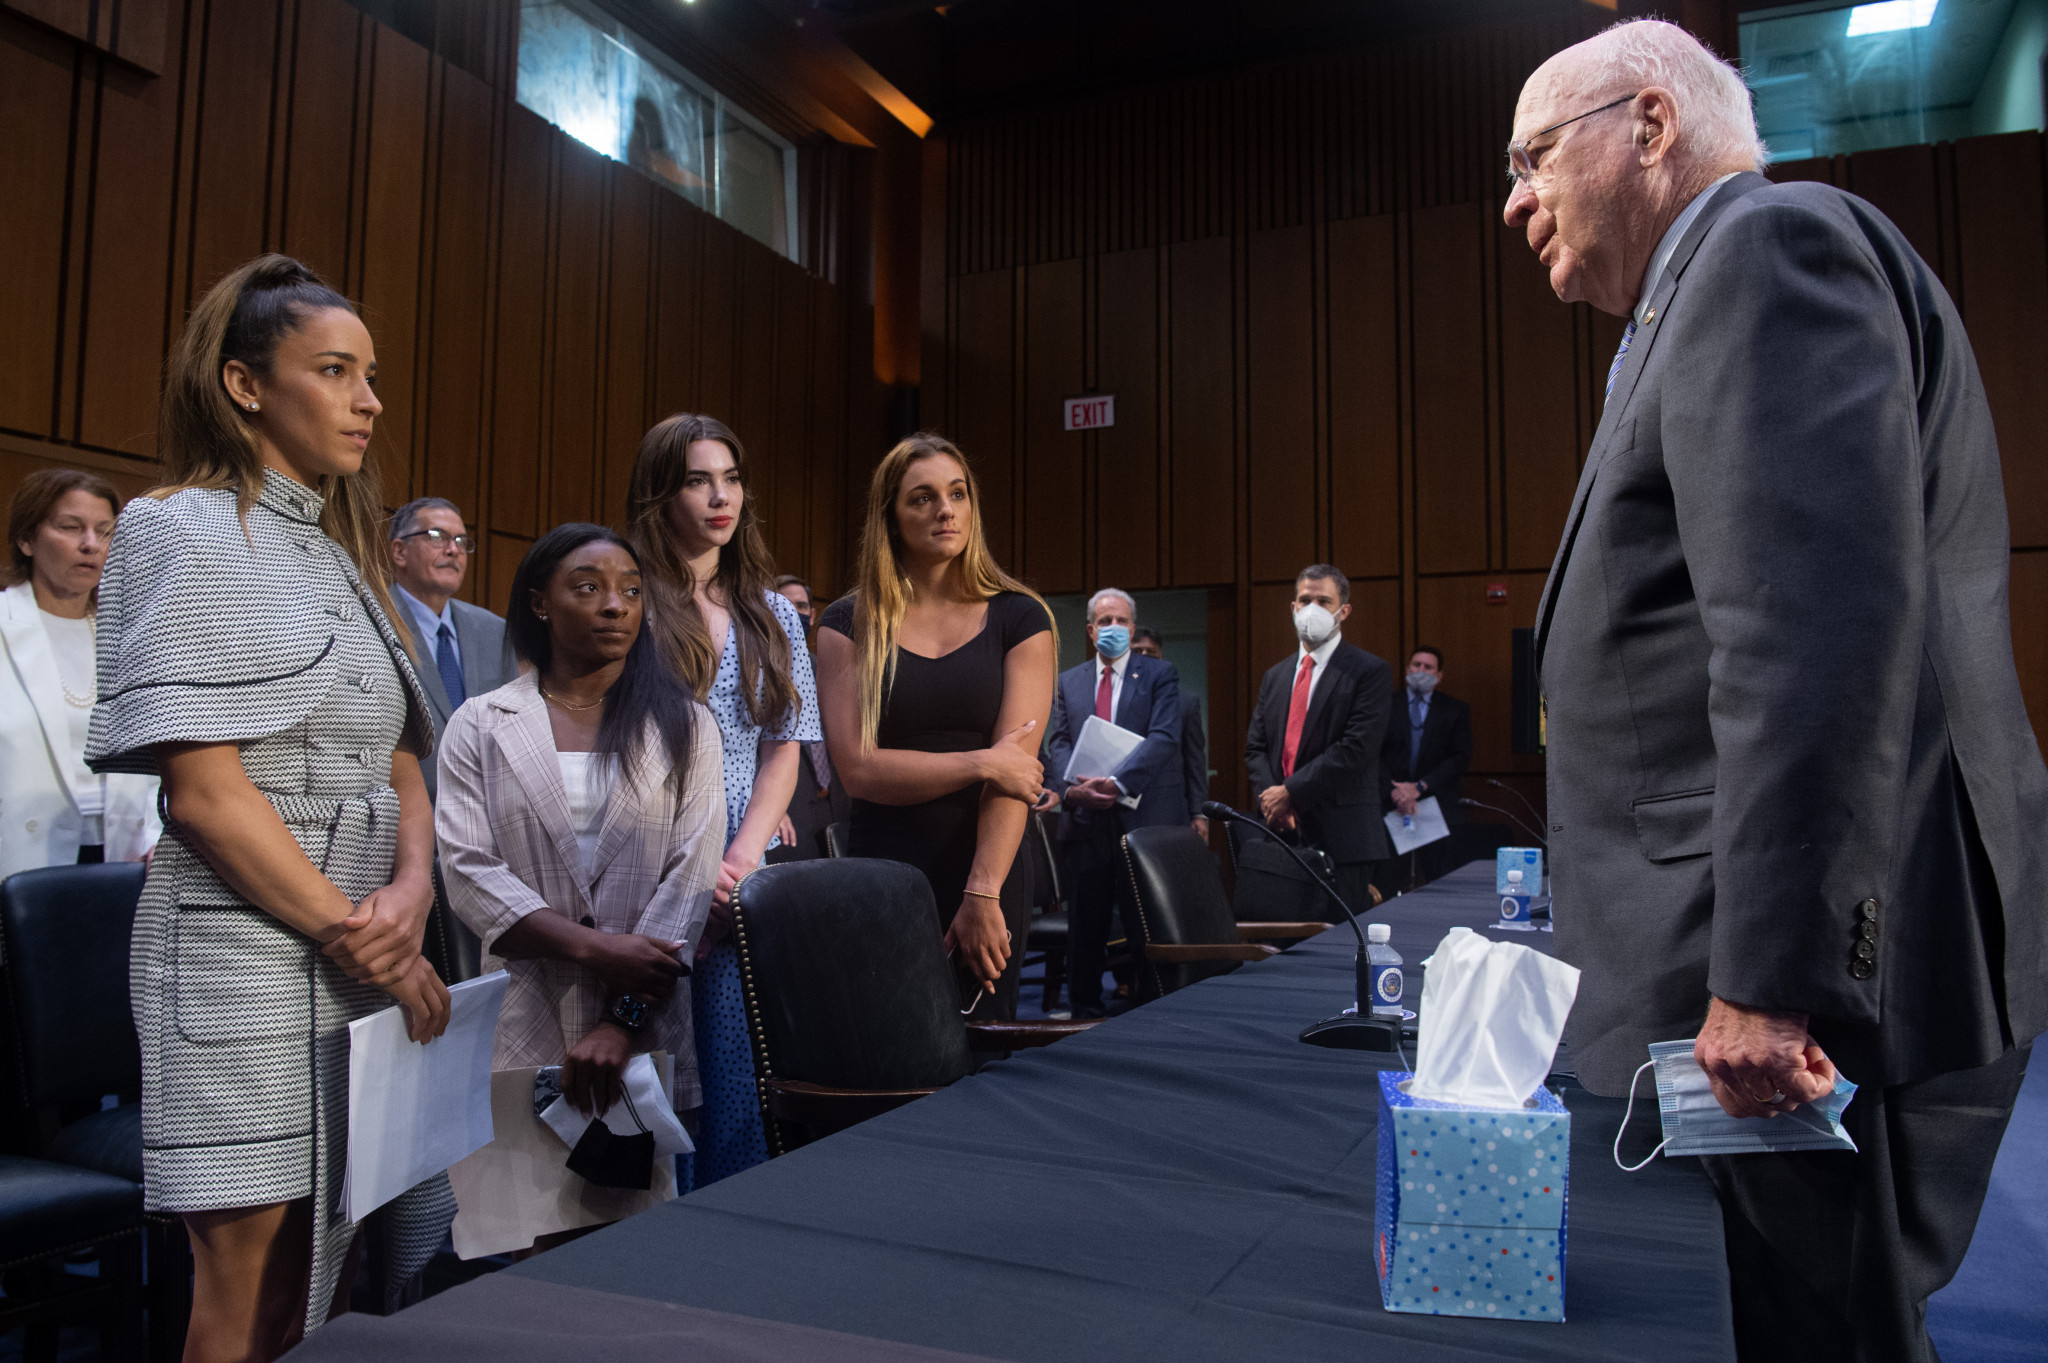 United States gymnasts Aly Raisman, Simone Biles, McKayla Maroney and Maggie Nichols testified at a hearing into the handling of an investigation by the FBI into sexual abuse by Nassar of US gymnasts ©Getty Images